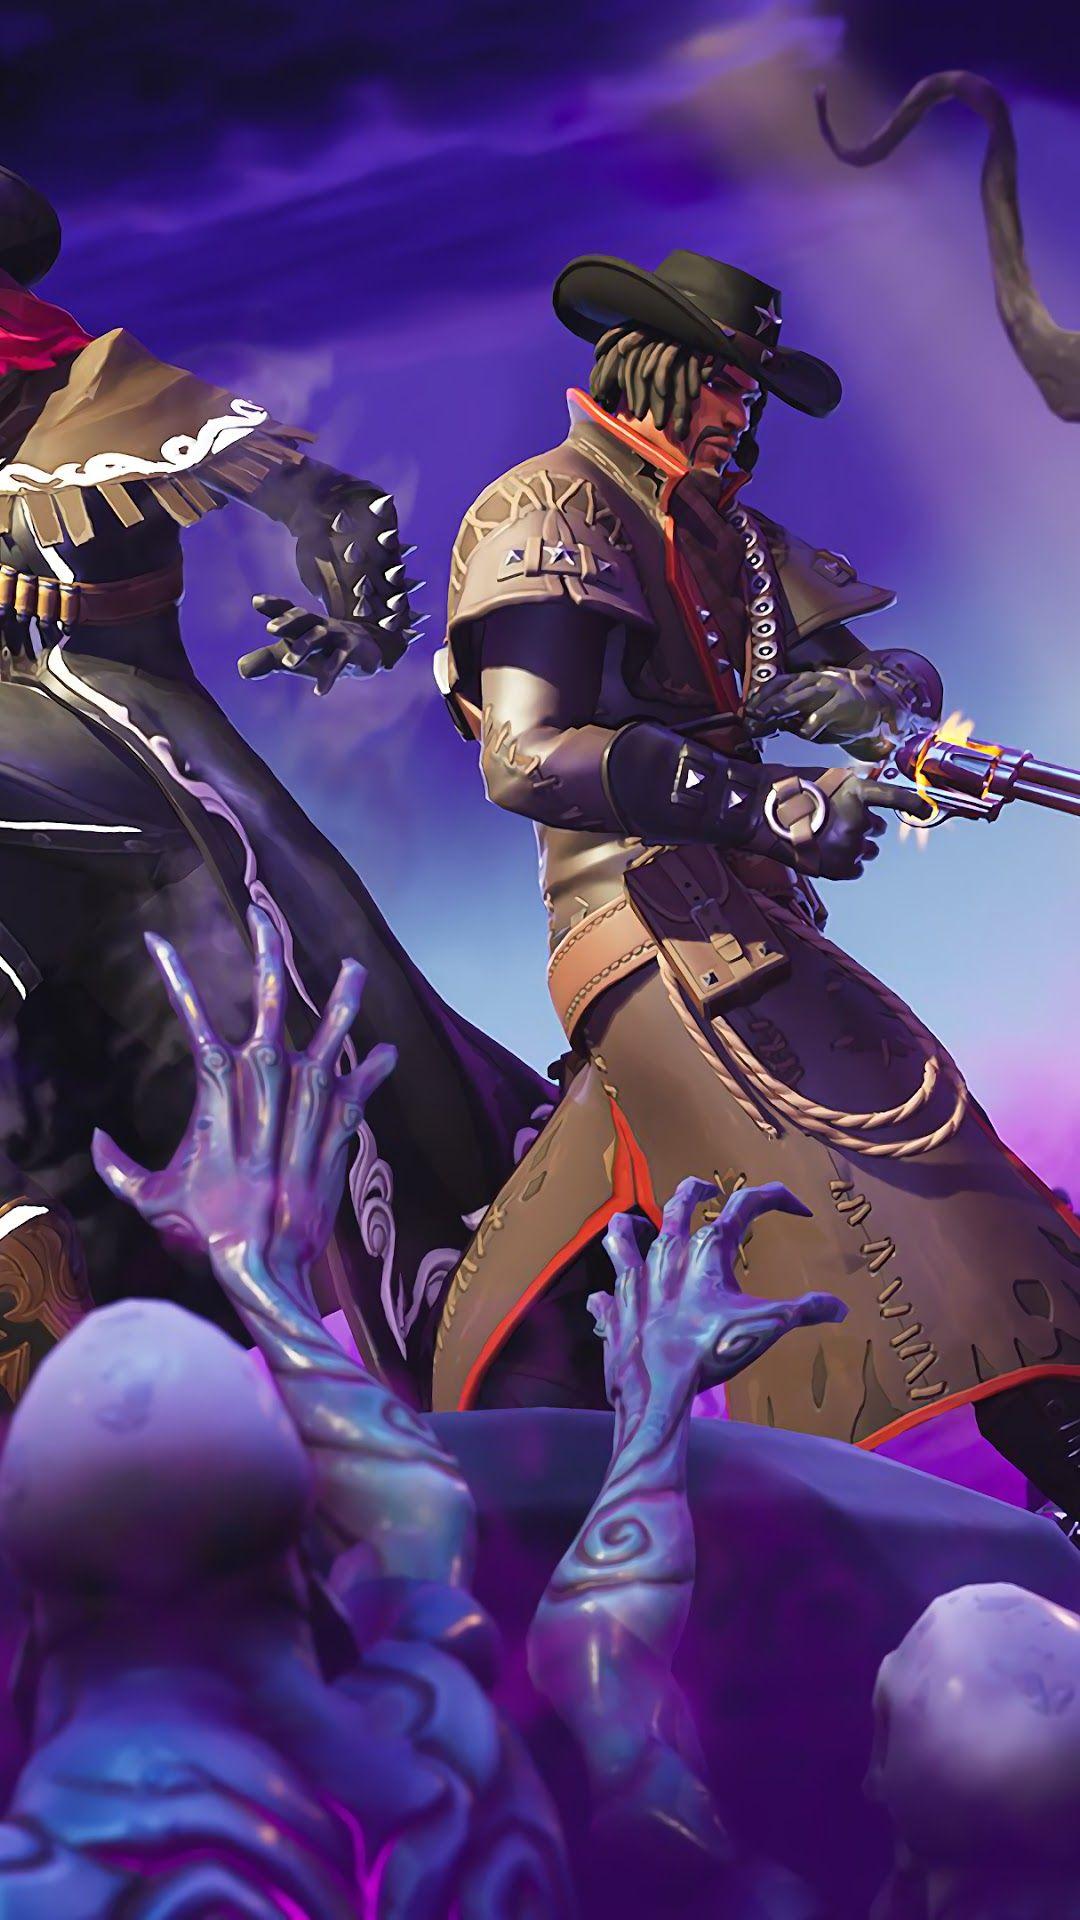 Fortnite Calamity Wallpapers Top Free Fortnite Calamity Backgrounds 